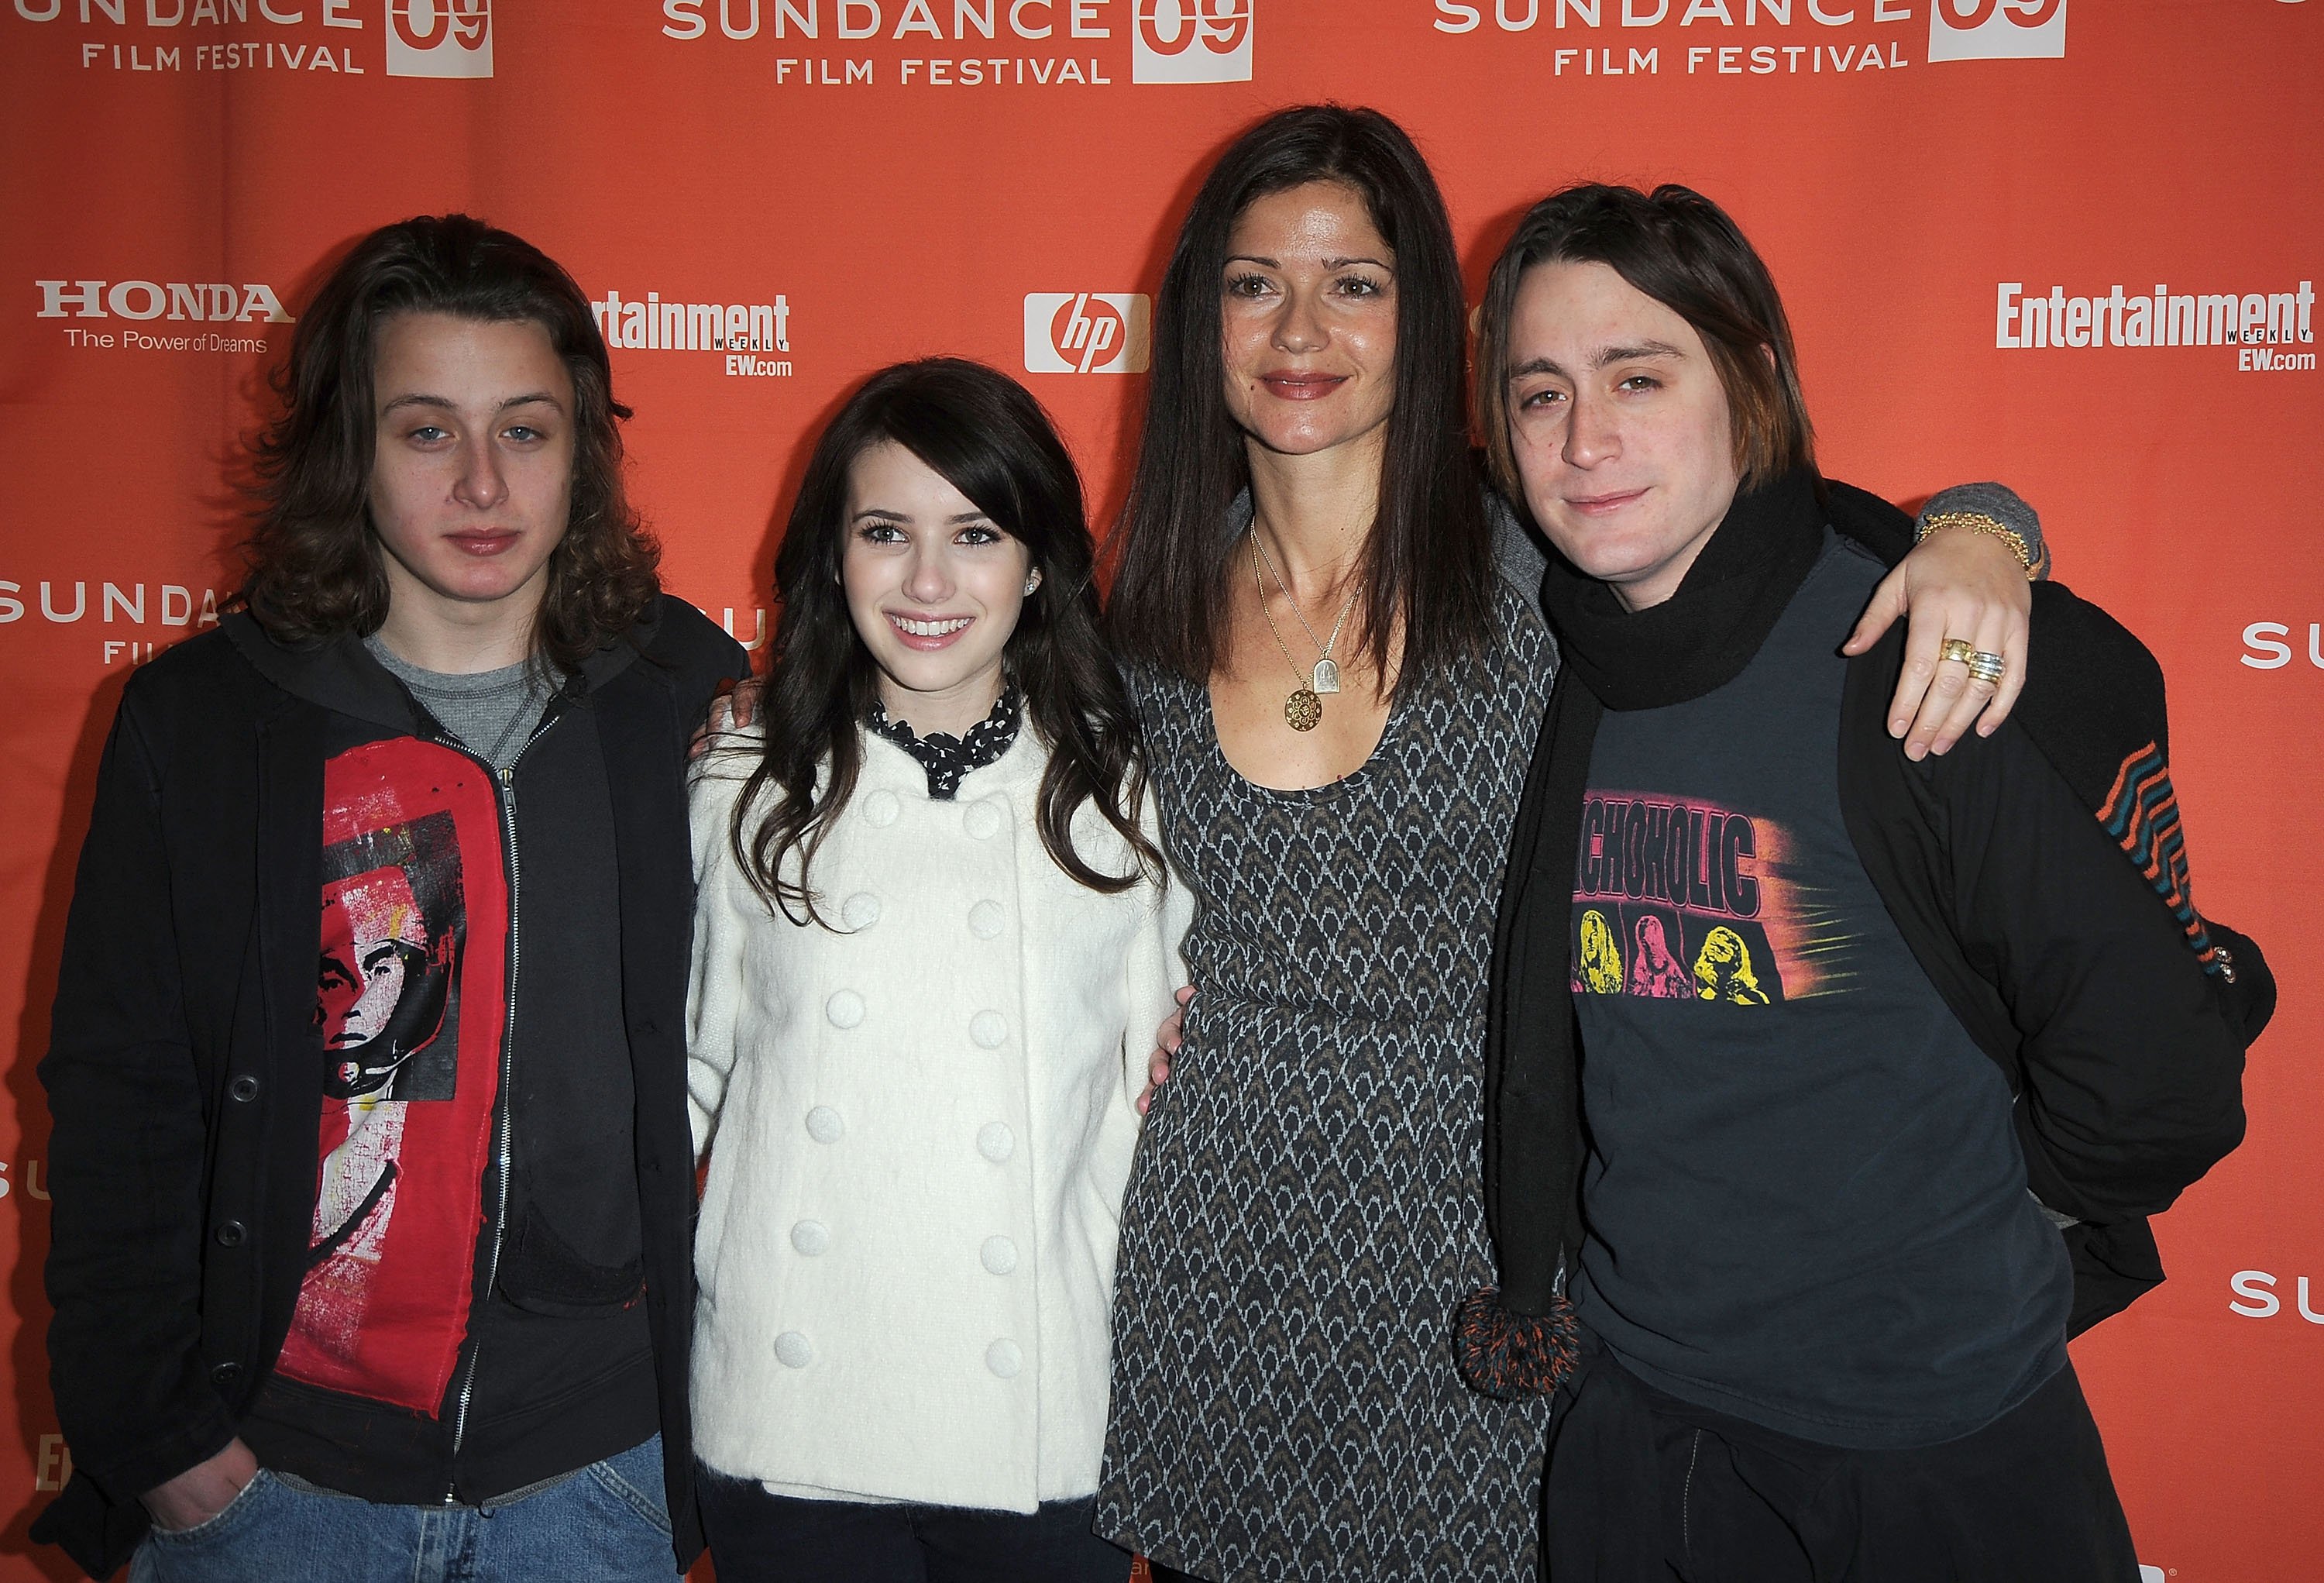 Rory Culkin, Emma Roberts, Jil Hennessey and Kieran Culkin attend the premiere of "Lymelife" during the 2009 Sundance Film Festival on January 17, 2009, in Park City, Utah. | Source: Getty Images